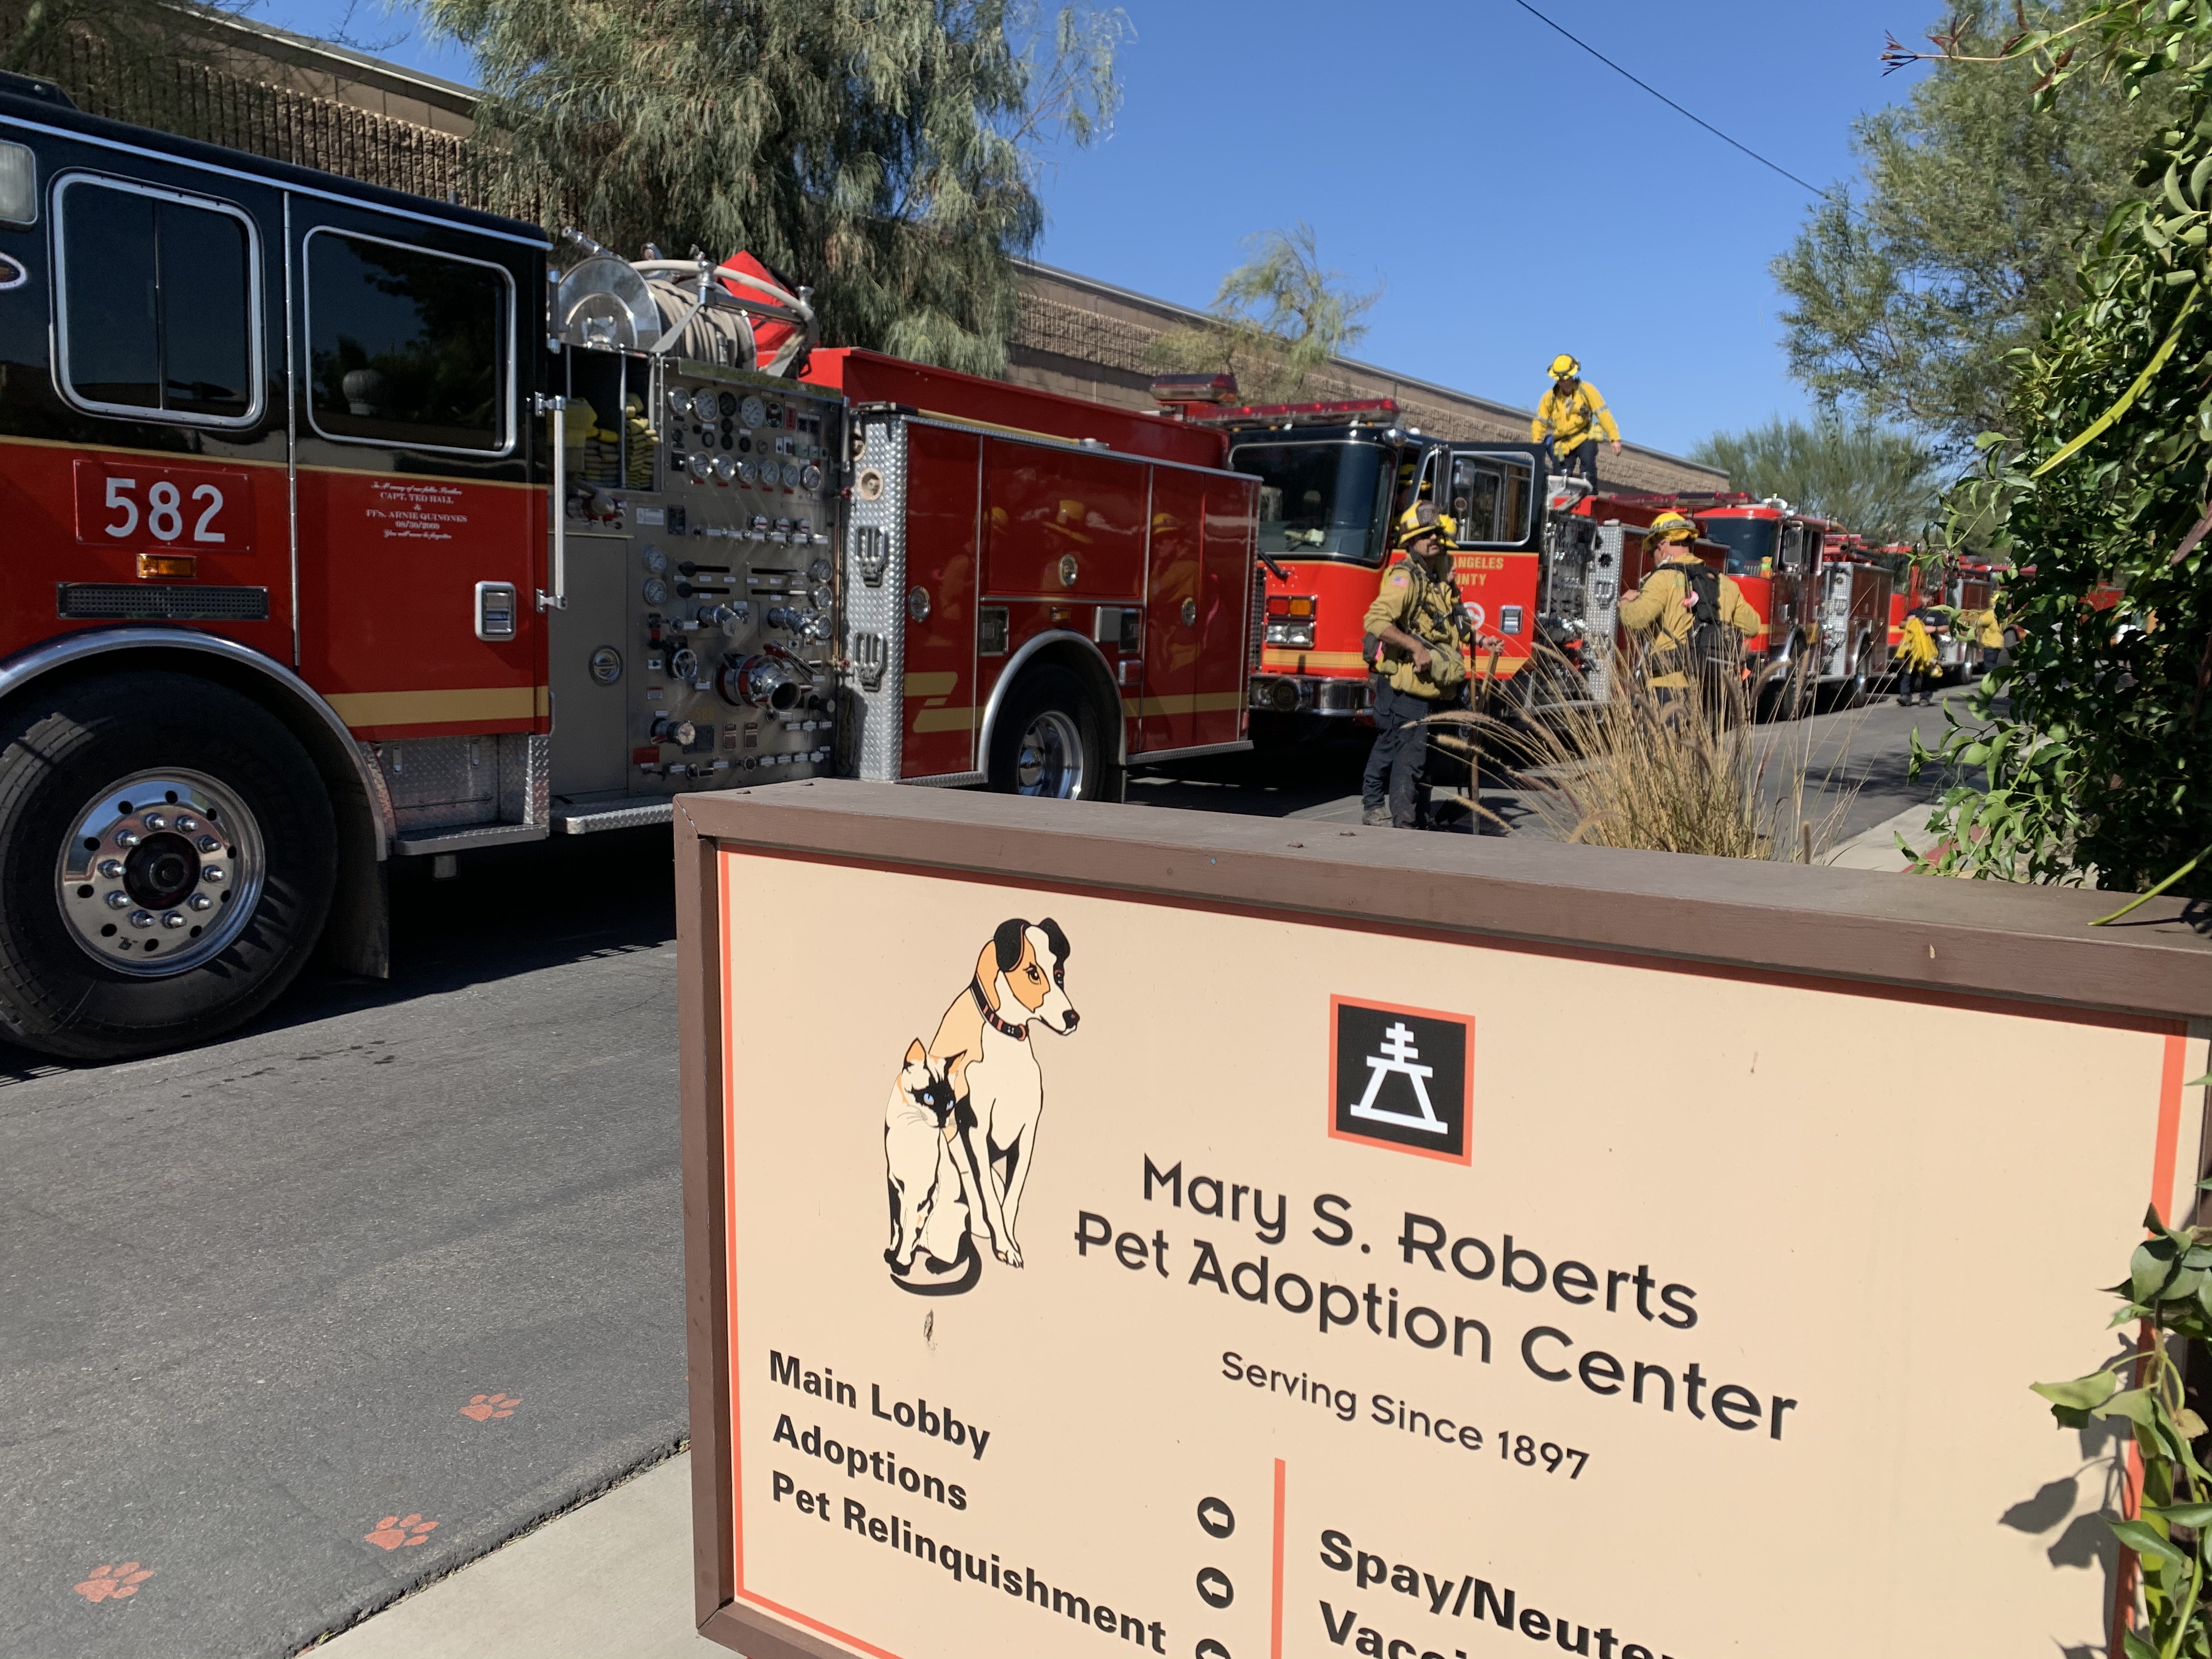 Oct. 31, 2019 - the day a fire crept up so close to the Center. So thankful to the firefighters who saved our pets.